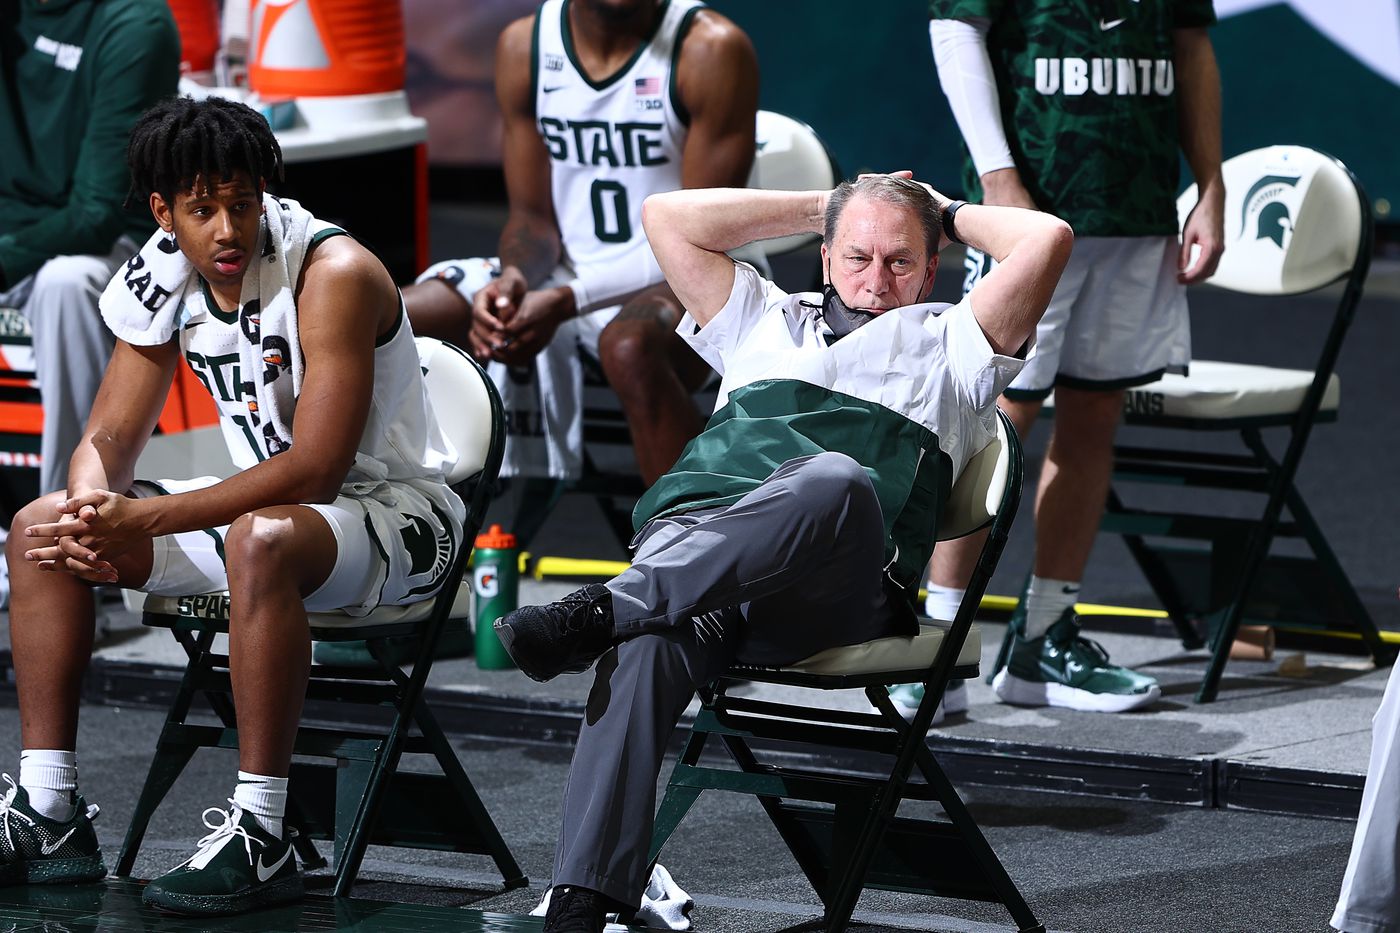 Msu Basketball Schedule 2022 Michigan State Basketball: Hierarchy A Big Question Mark For 2021-2022 -  The Only Colors